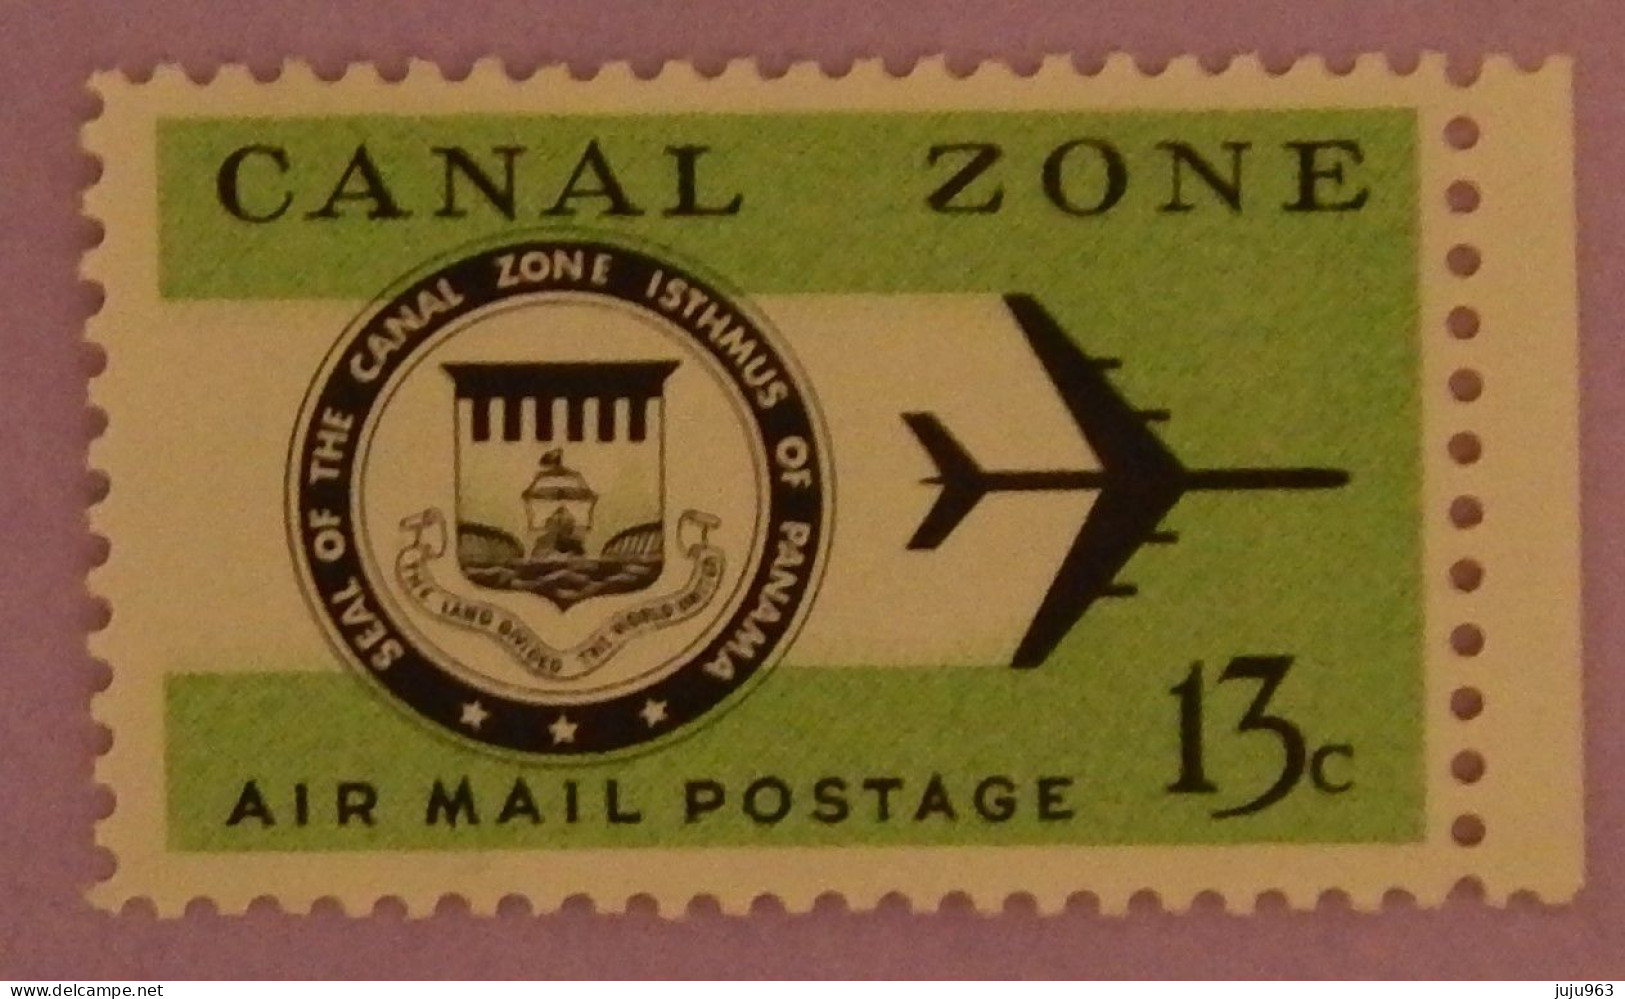 CANAL ZONE SG 236 NEUF**MNH  ANNEE 1974 - Zona Del Canale / Canal Zone